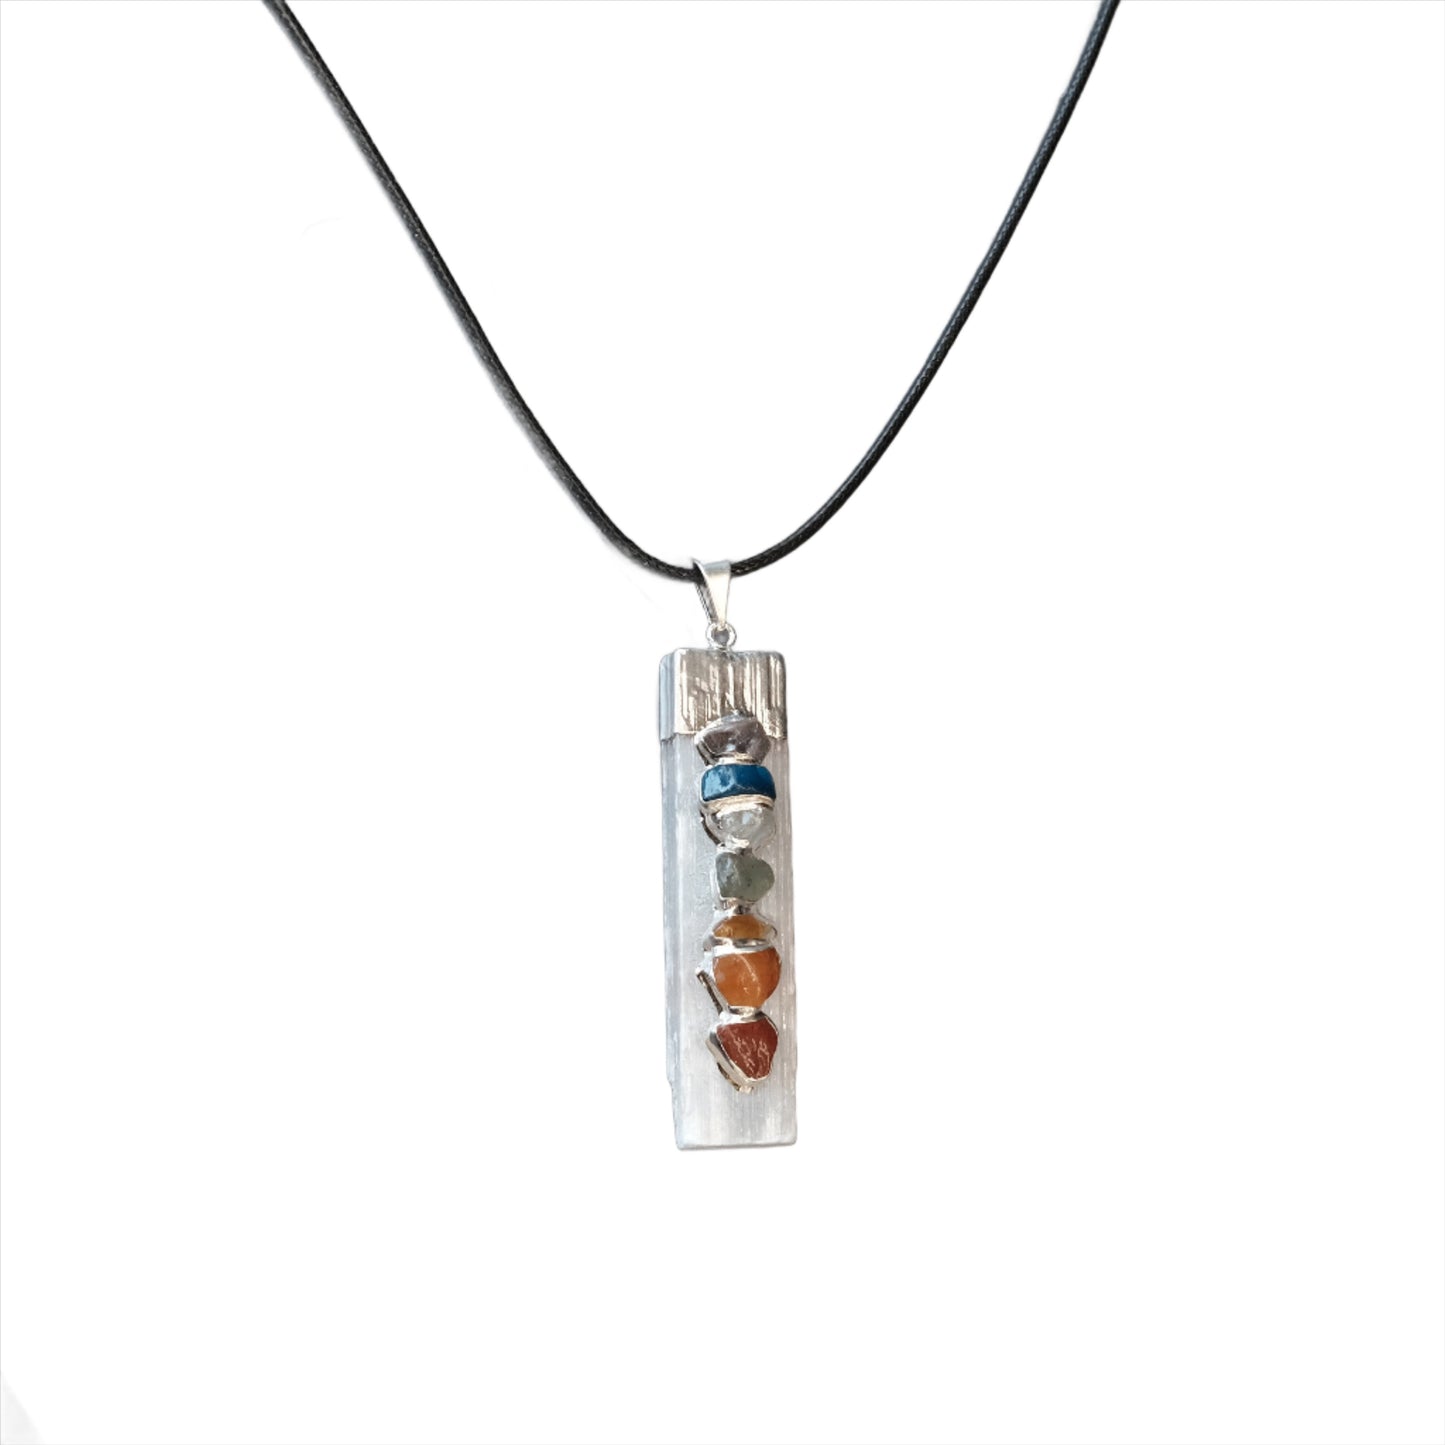 Selenite Pendant with Seven Energy Centers Necklace